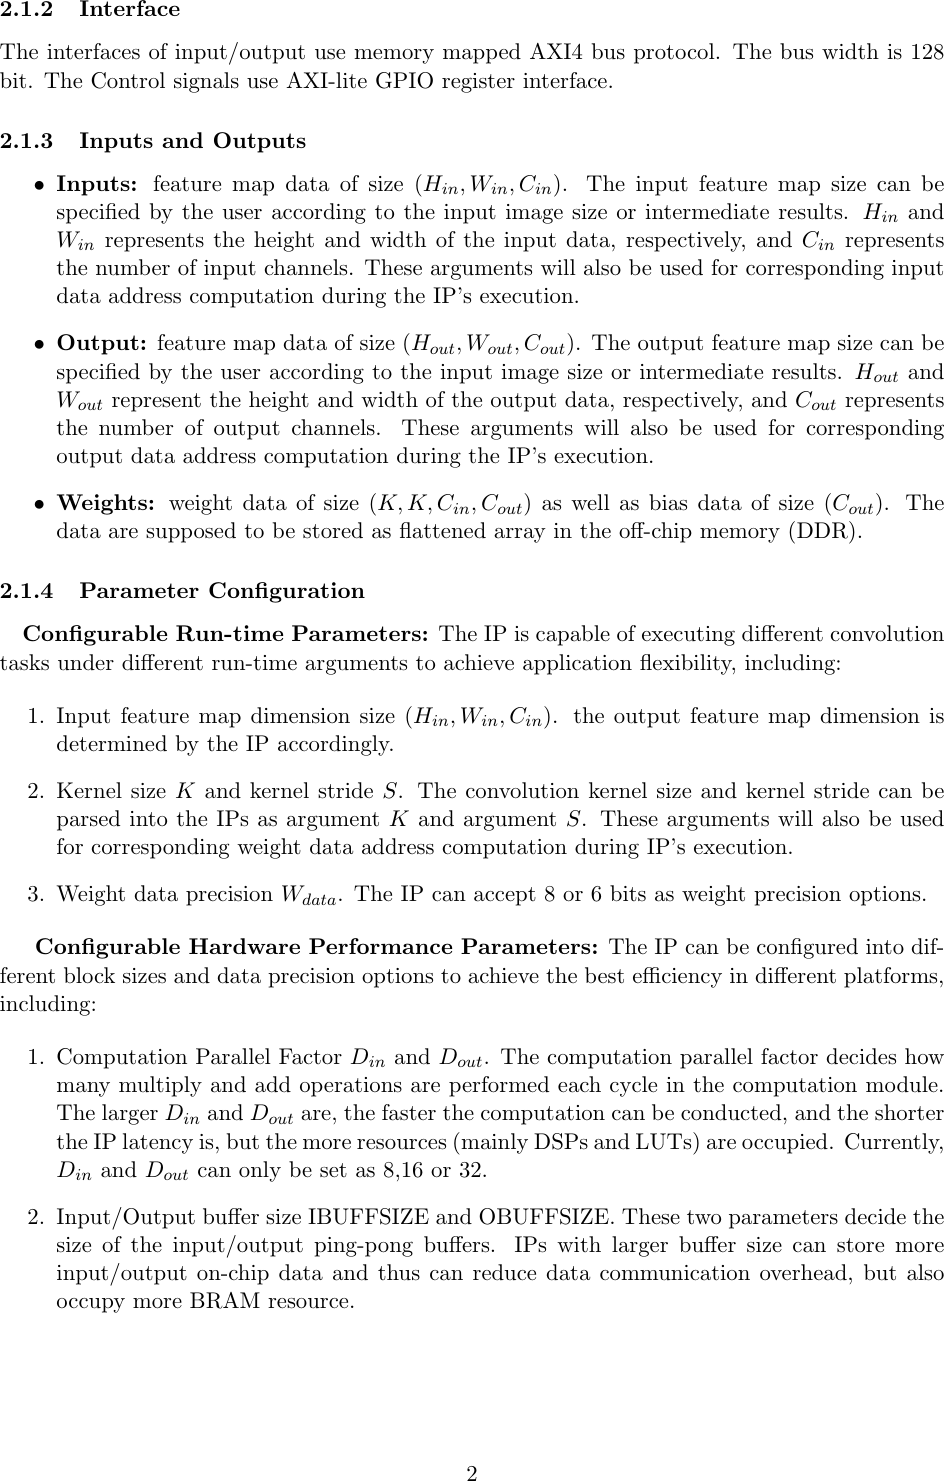 Page 2 of 10 - Open Source IP Manual